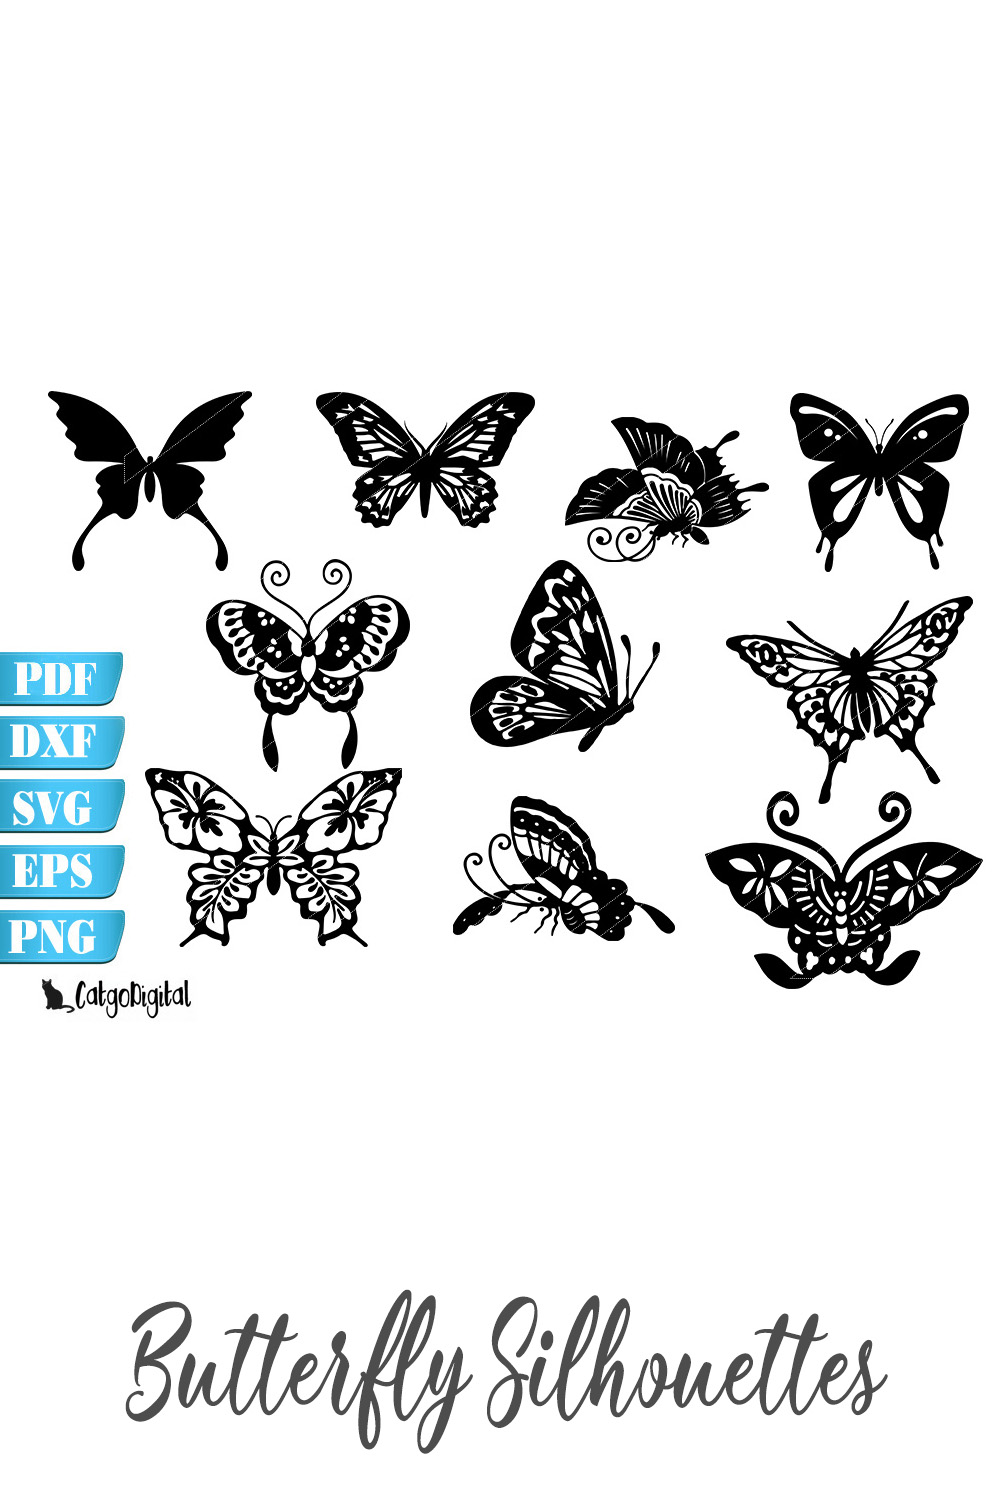 Bunch of butterflies that are on a white background.